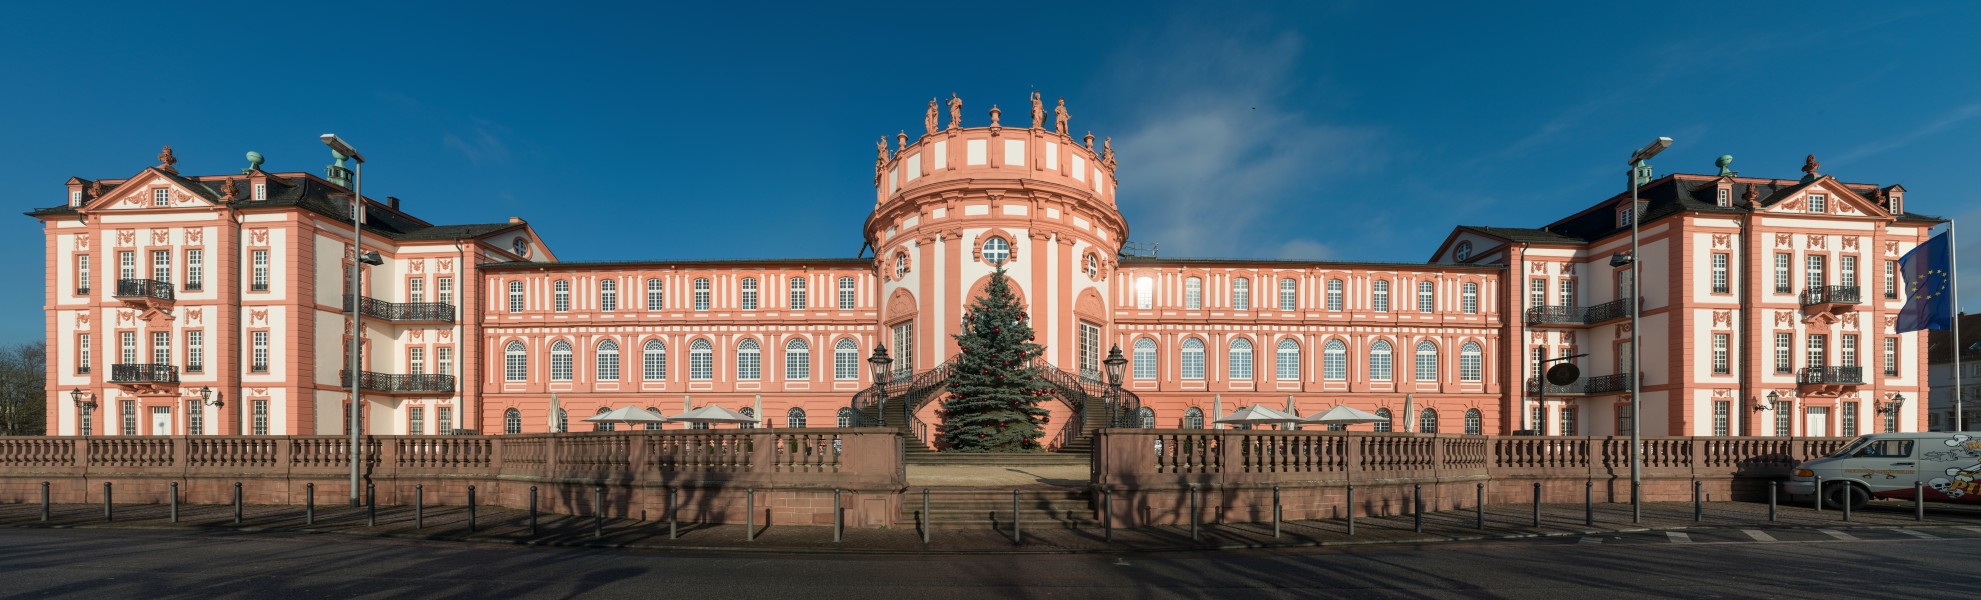 Schloss Biebrich, South view, Panini General projection 20150107 1